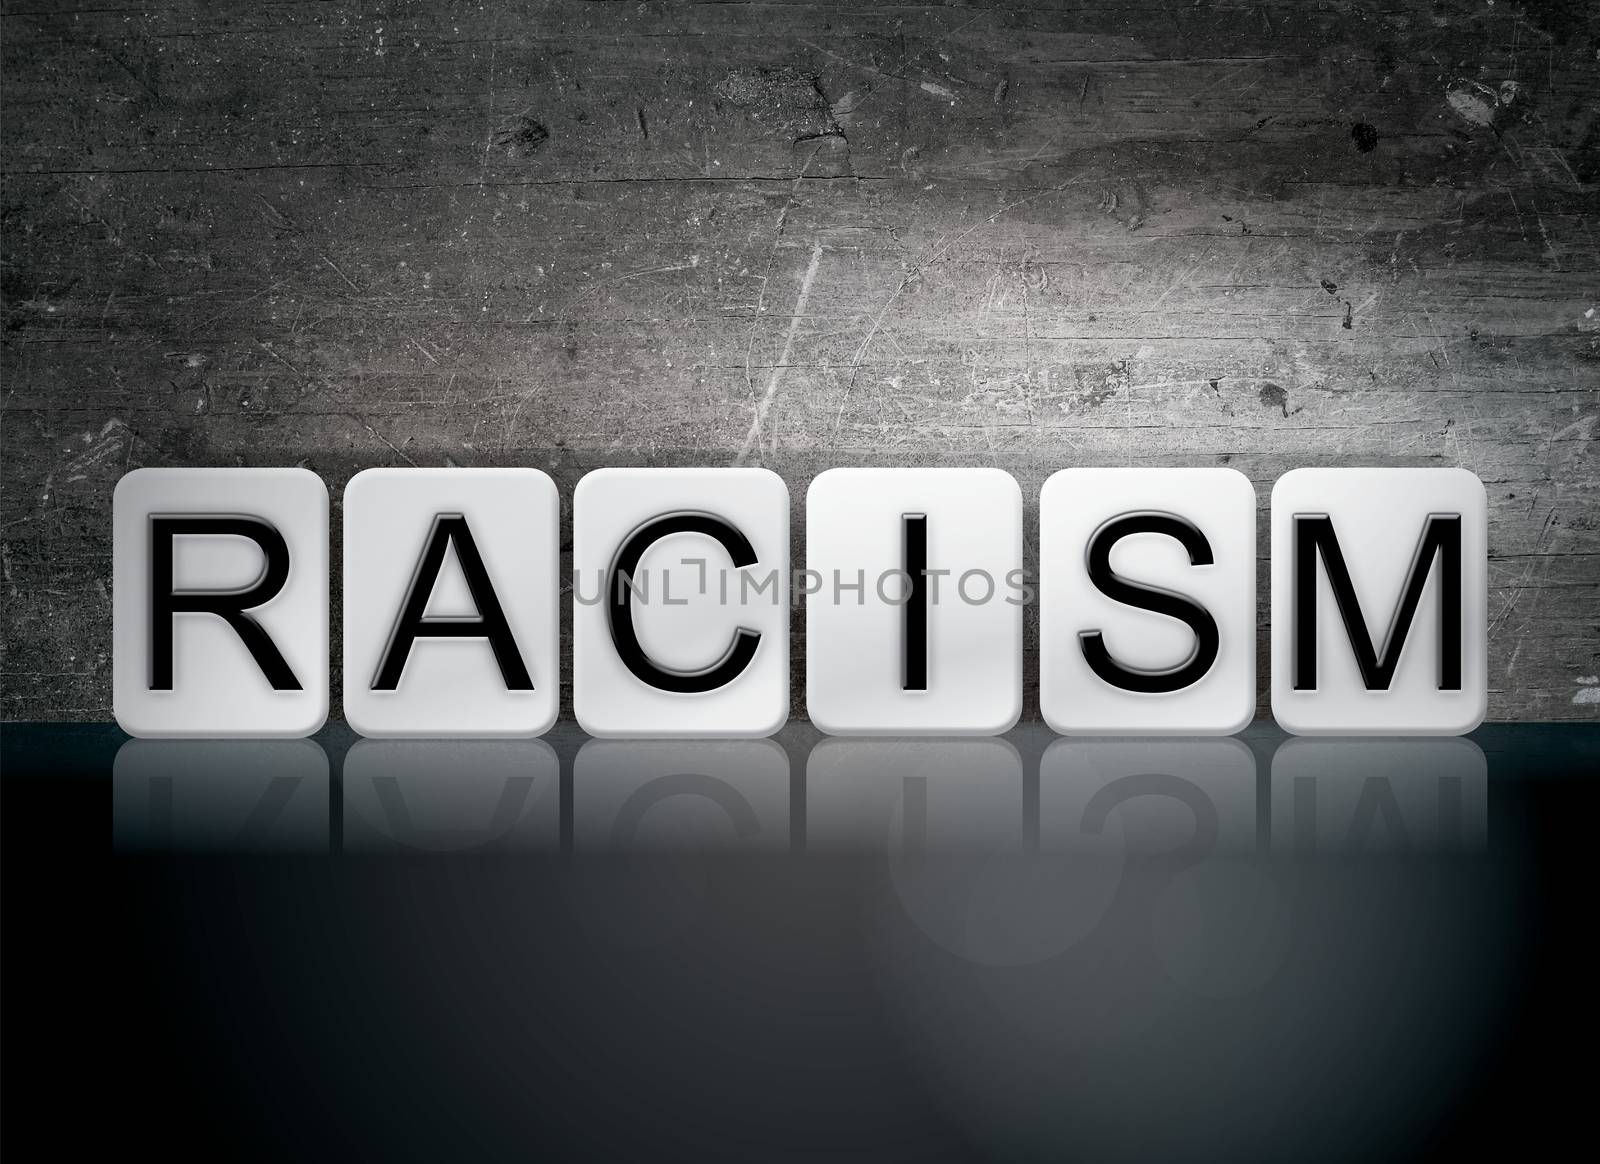 The word "Racism" written in white tiles against a dark vintage grunge background.